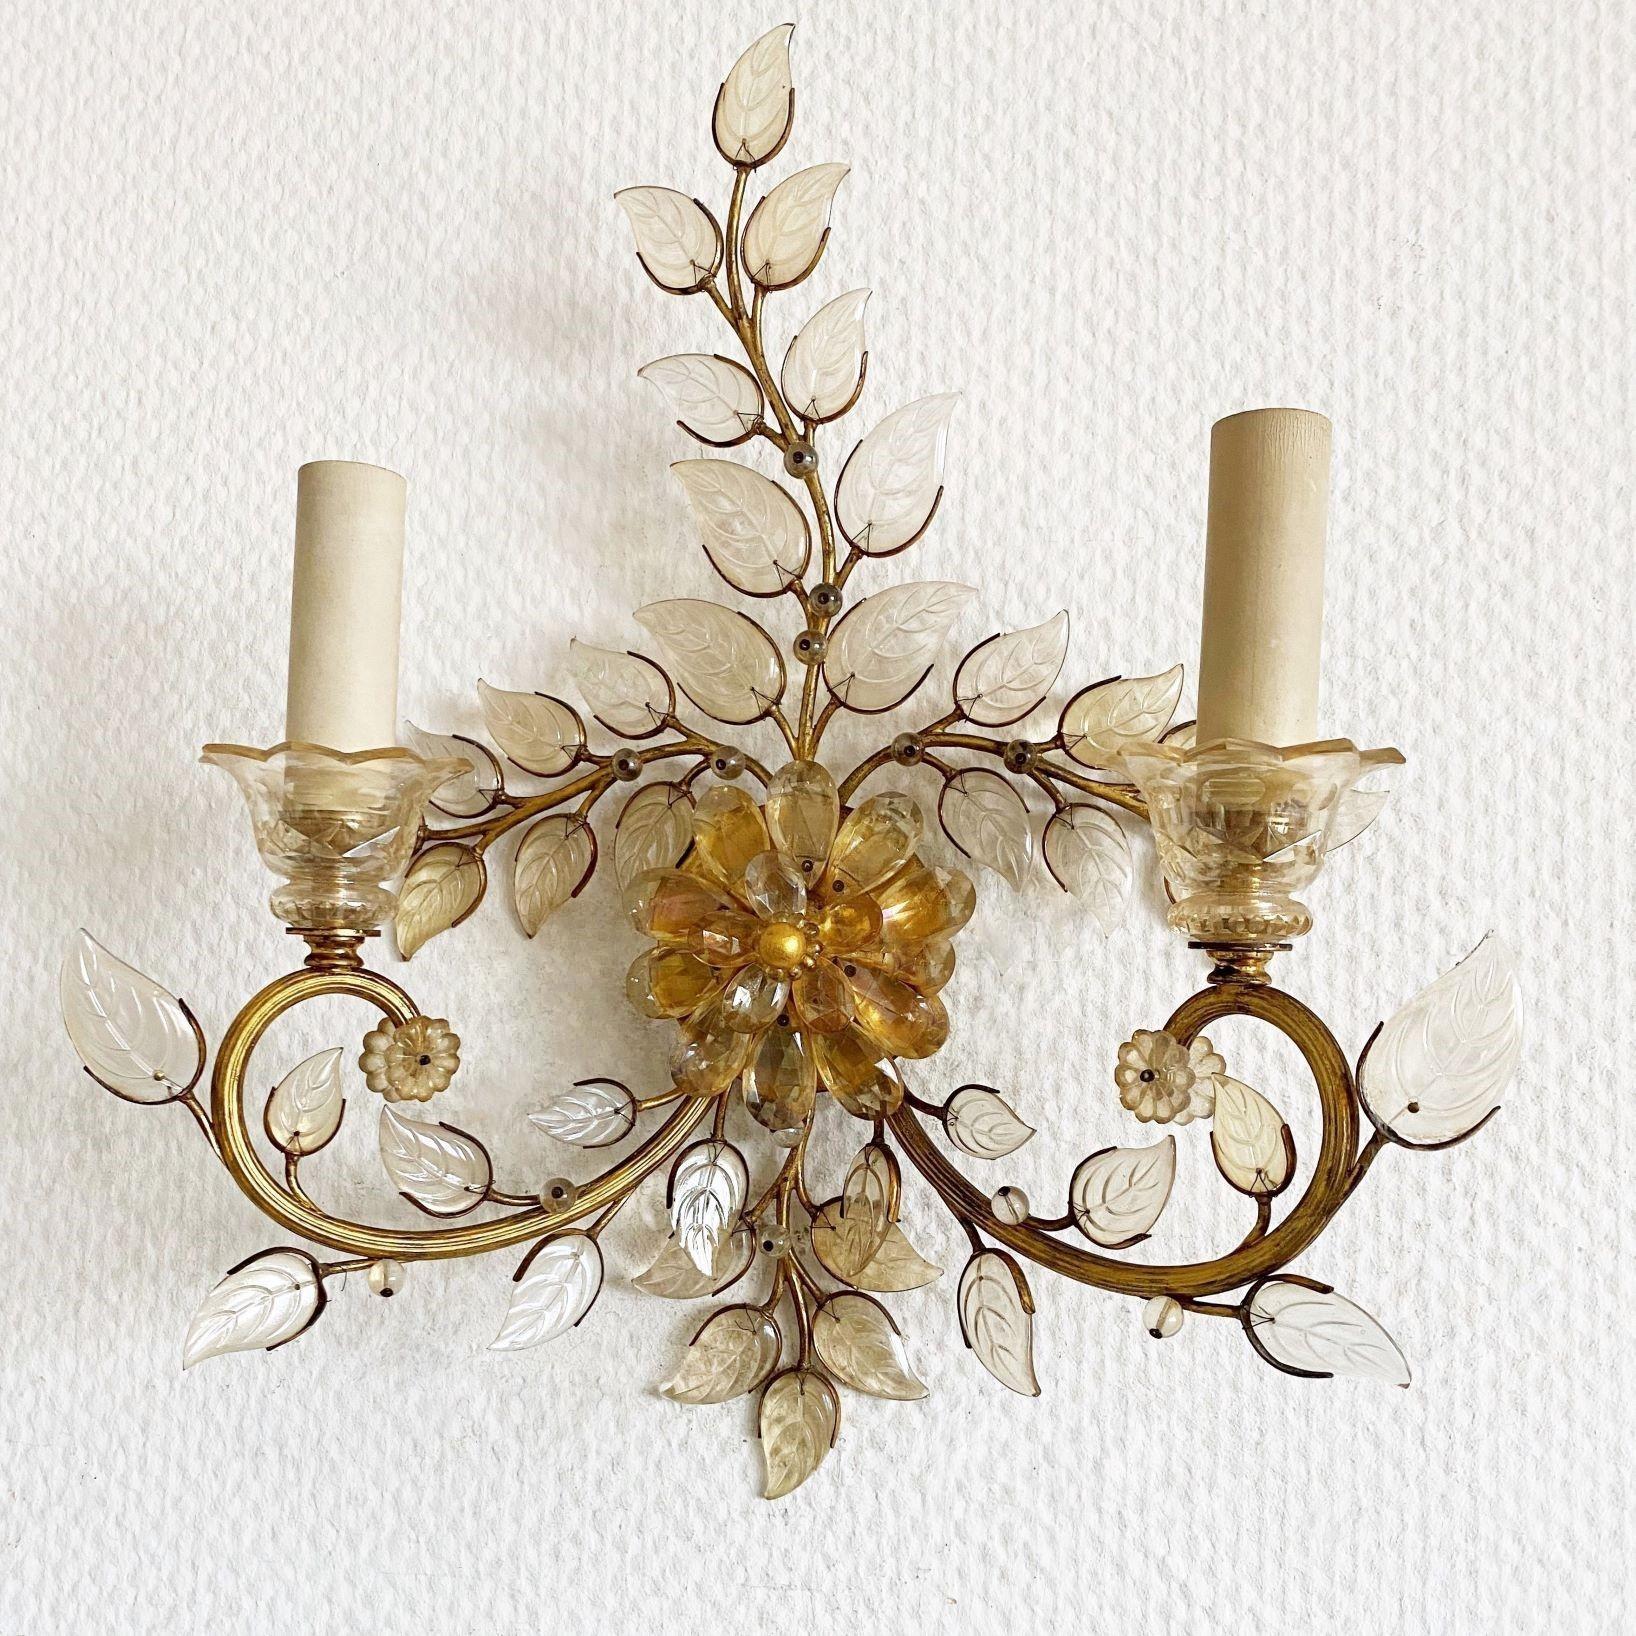 An elegant Maison Baguès gilt-brass two-branch wall sconce, France 1950s. Beautifuly decorate with glass leaves and a central flower with amber crystal elements, two cut crystal tulips holding the candle sleeve-lights, brass round back base. The